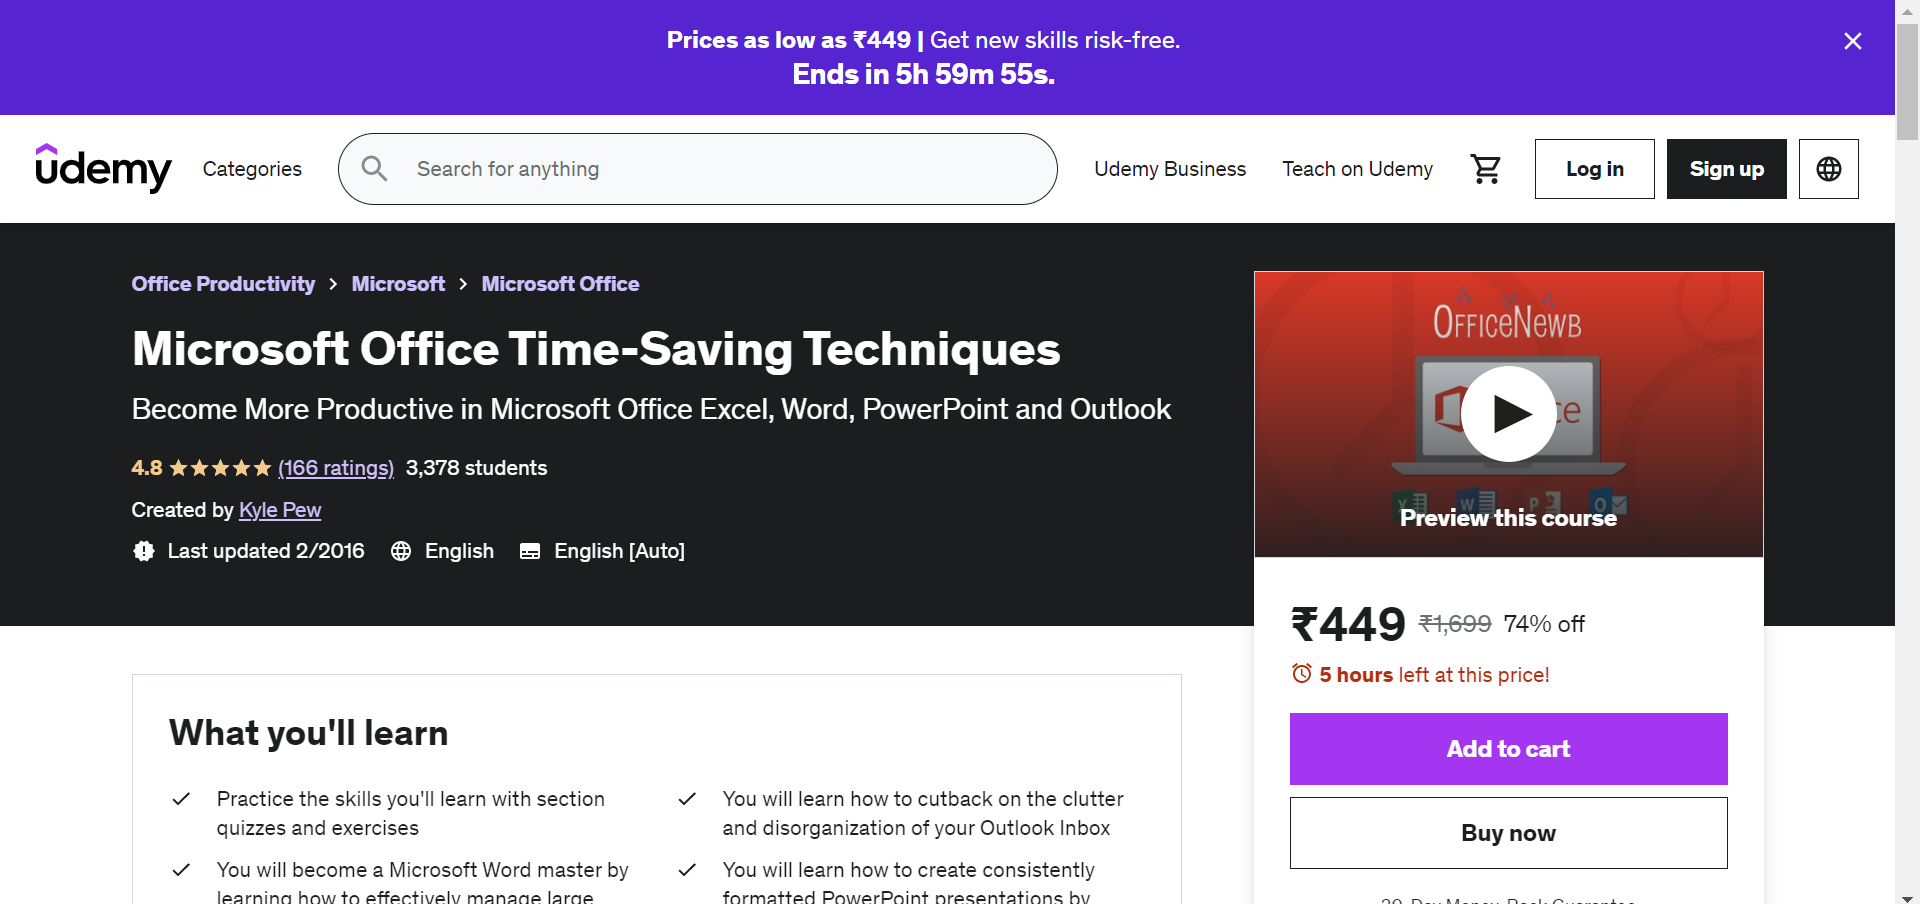 Microsoft Office Time-Saving Techniques